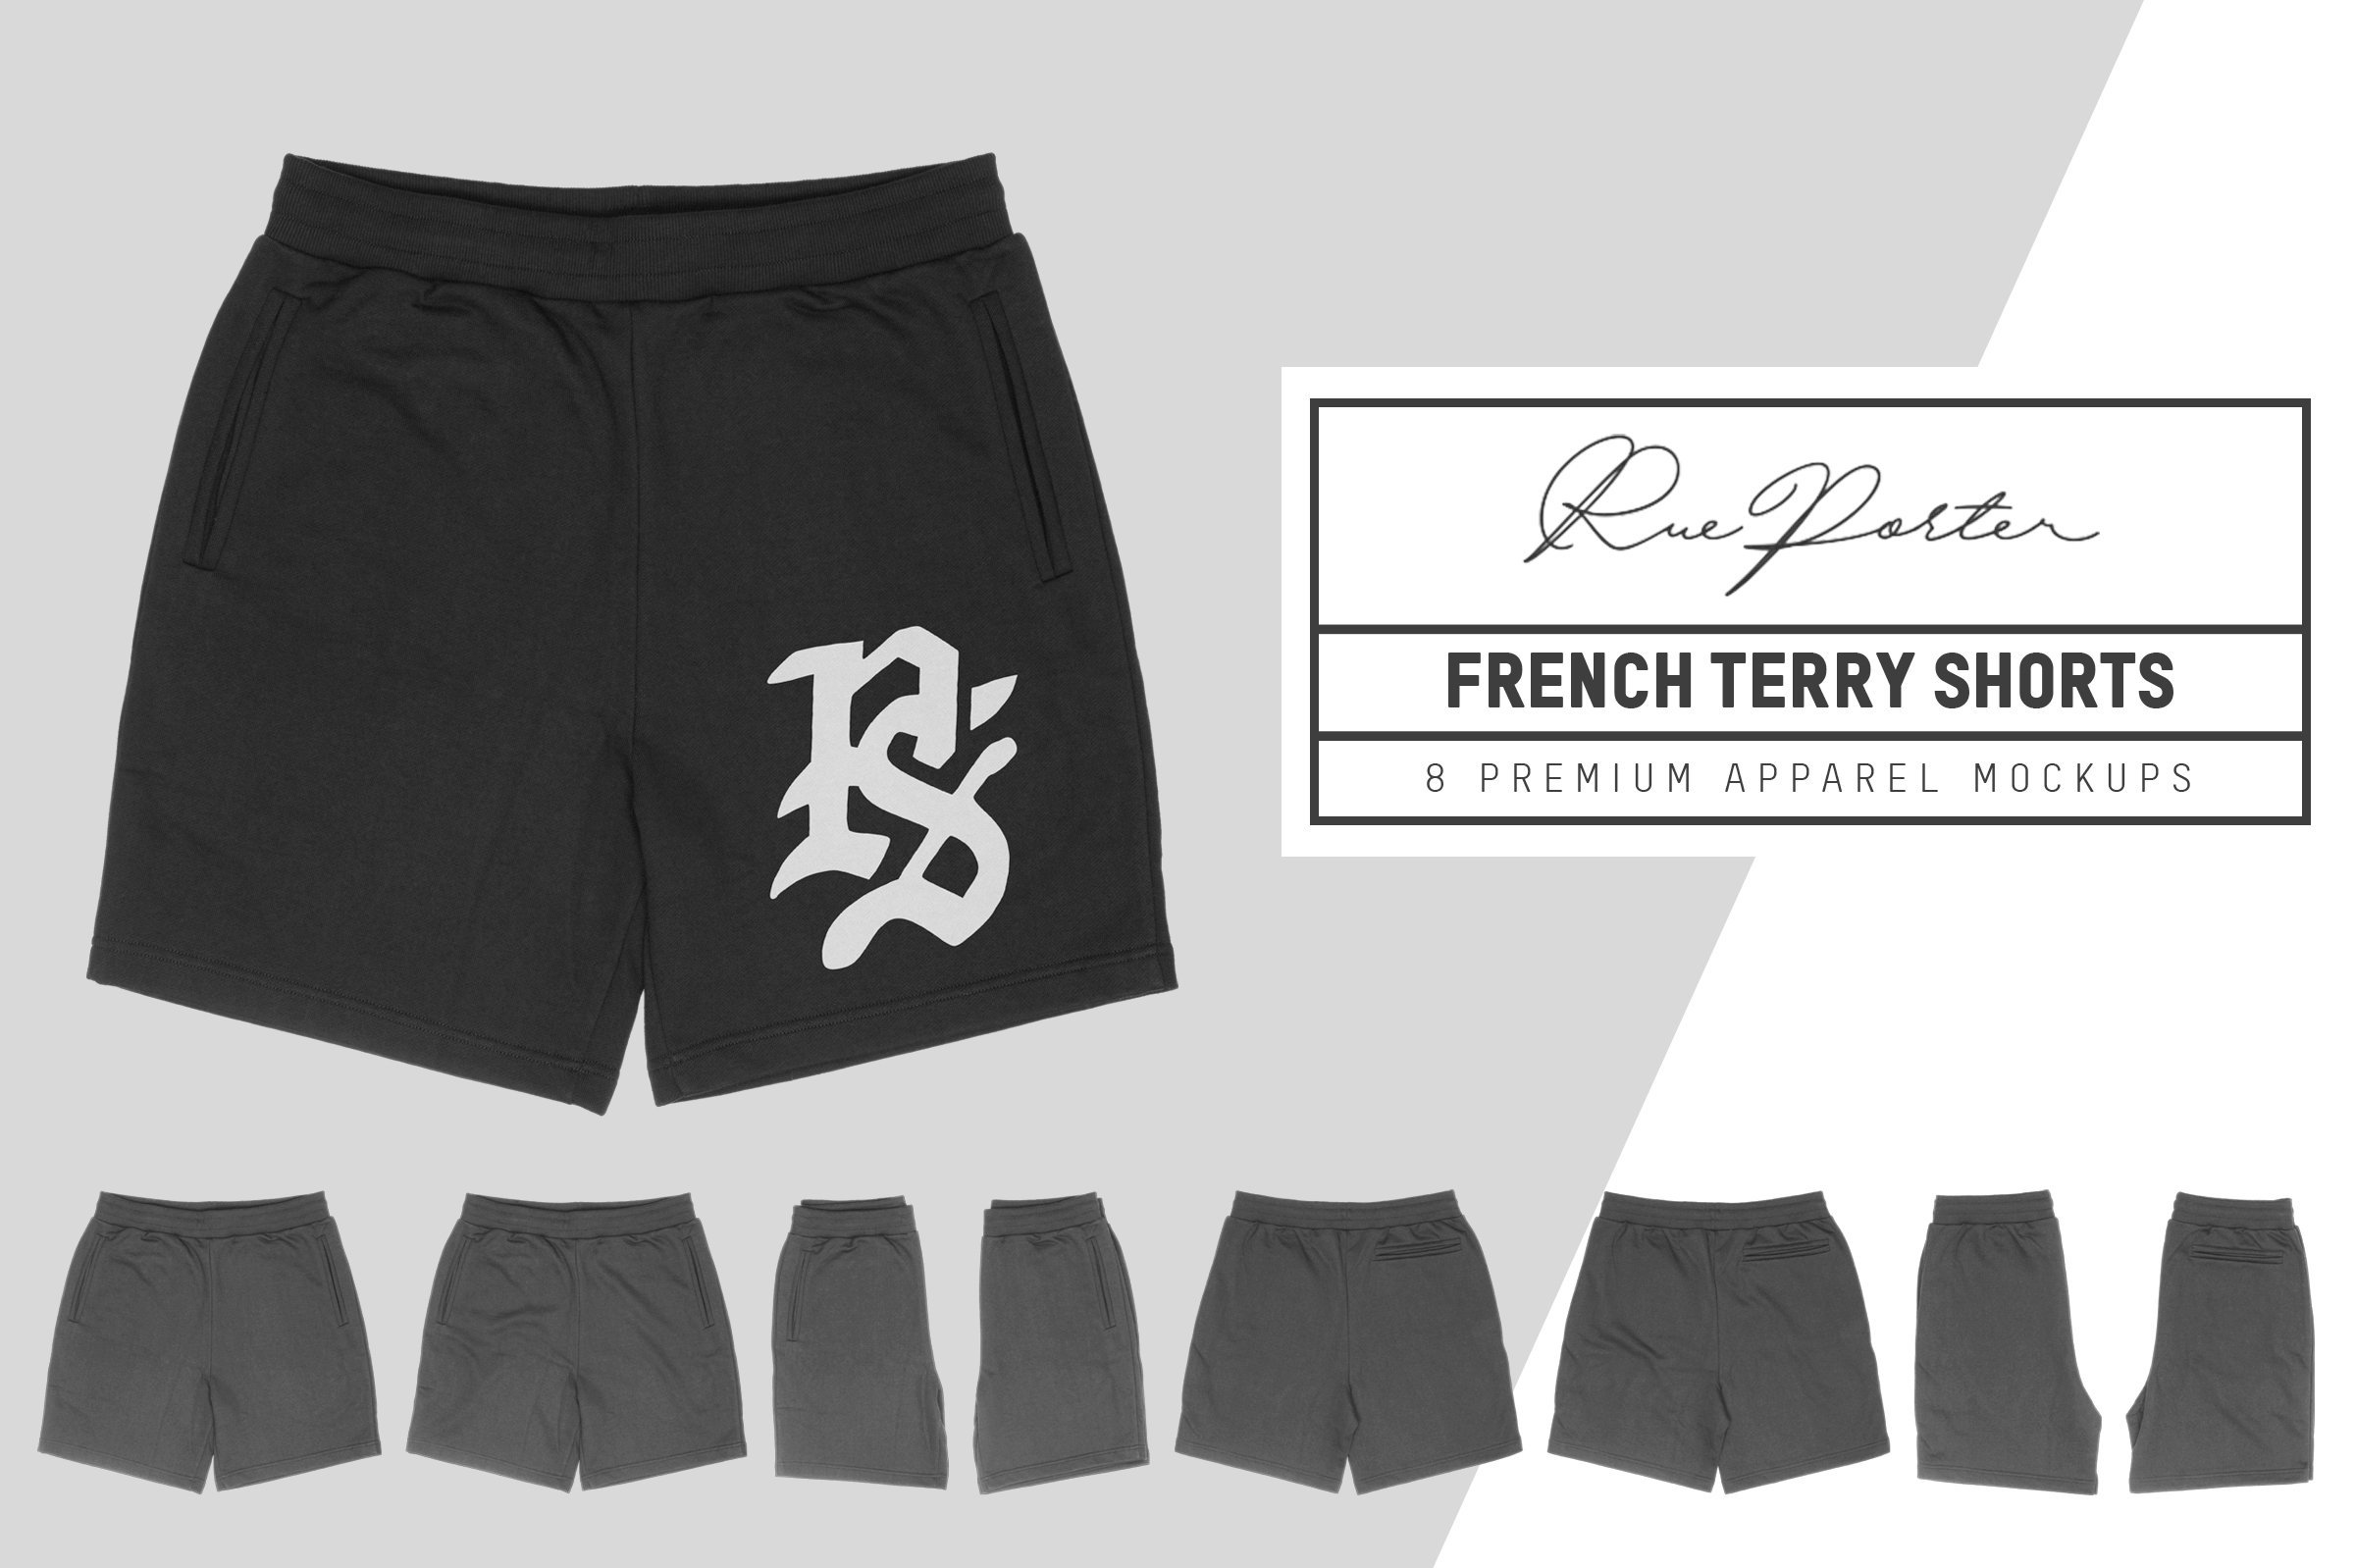 Rue Porter French Terry Shorts 1